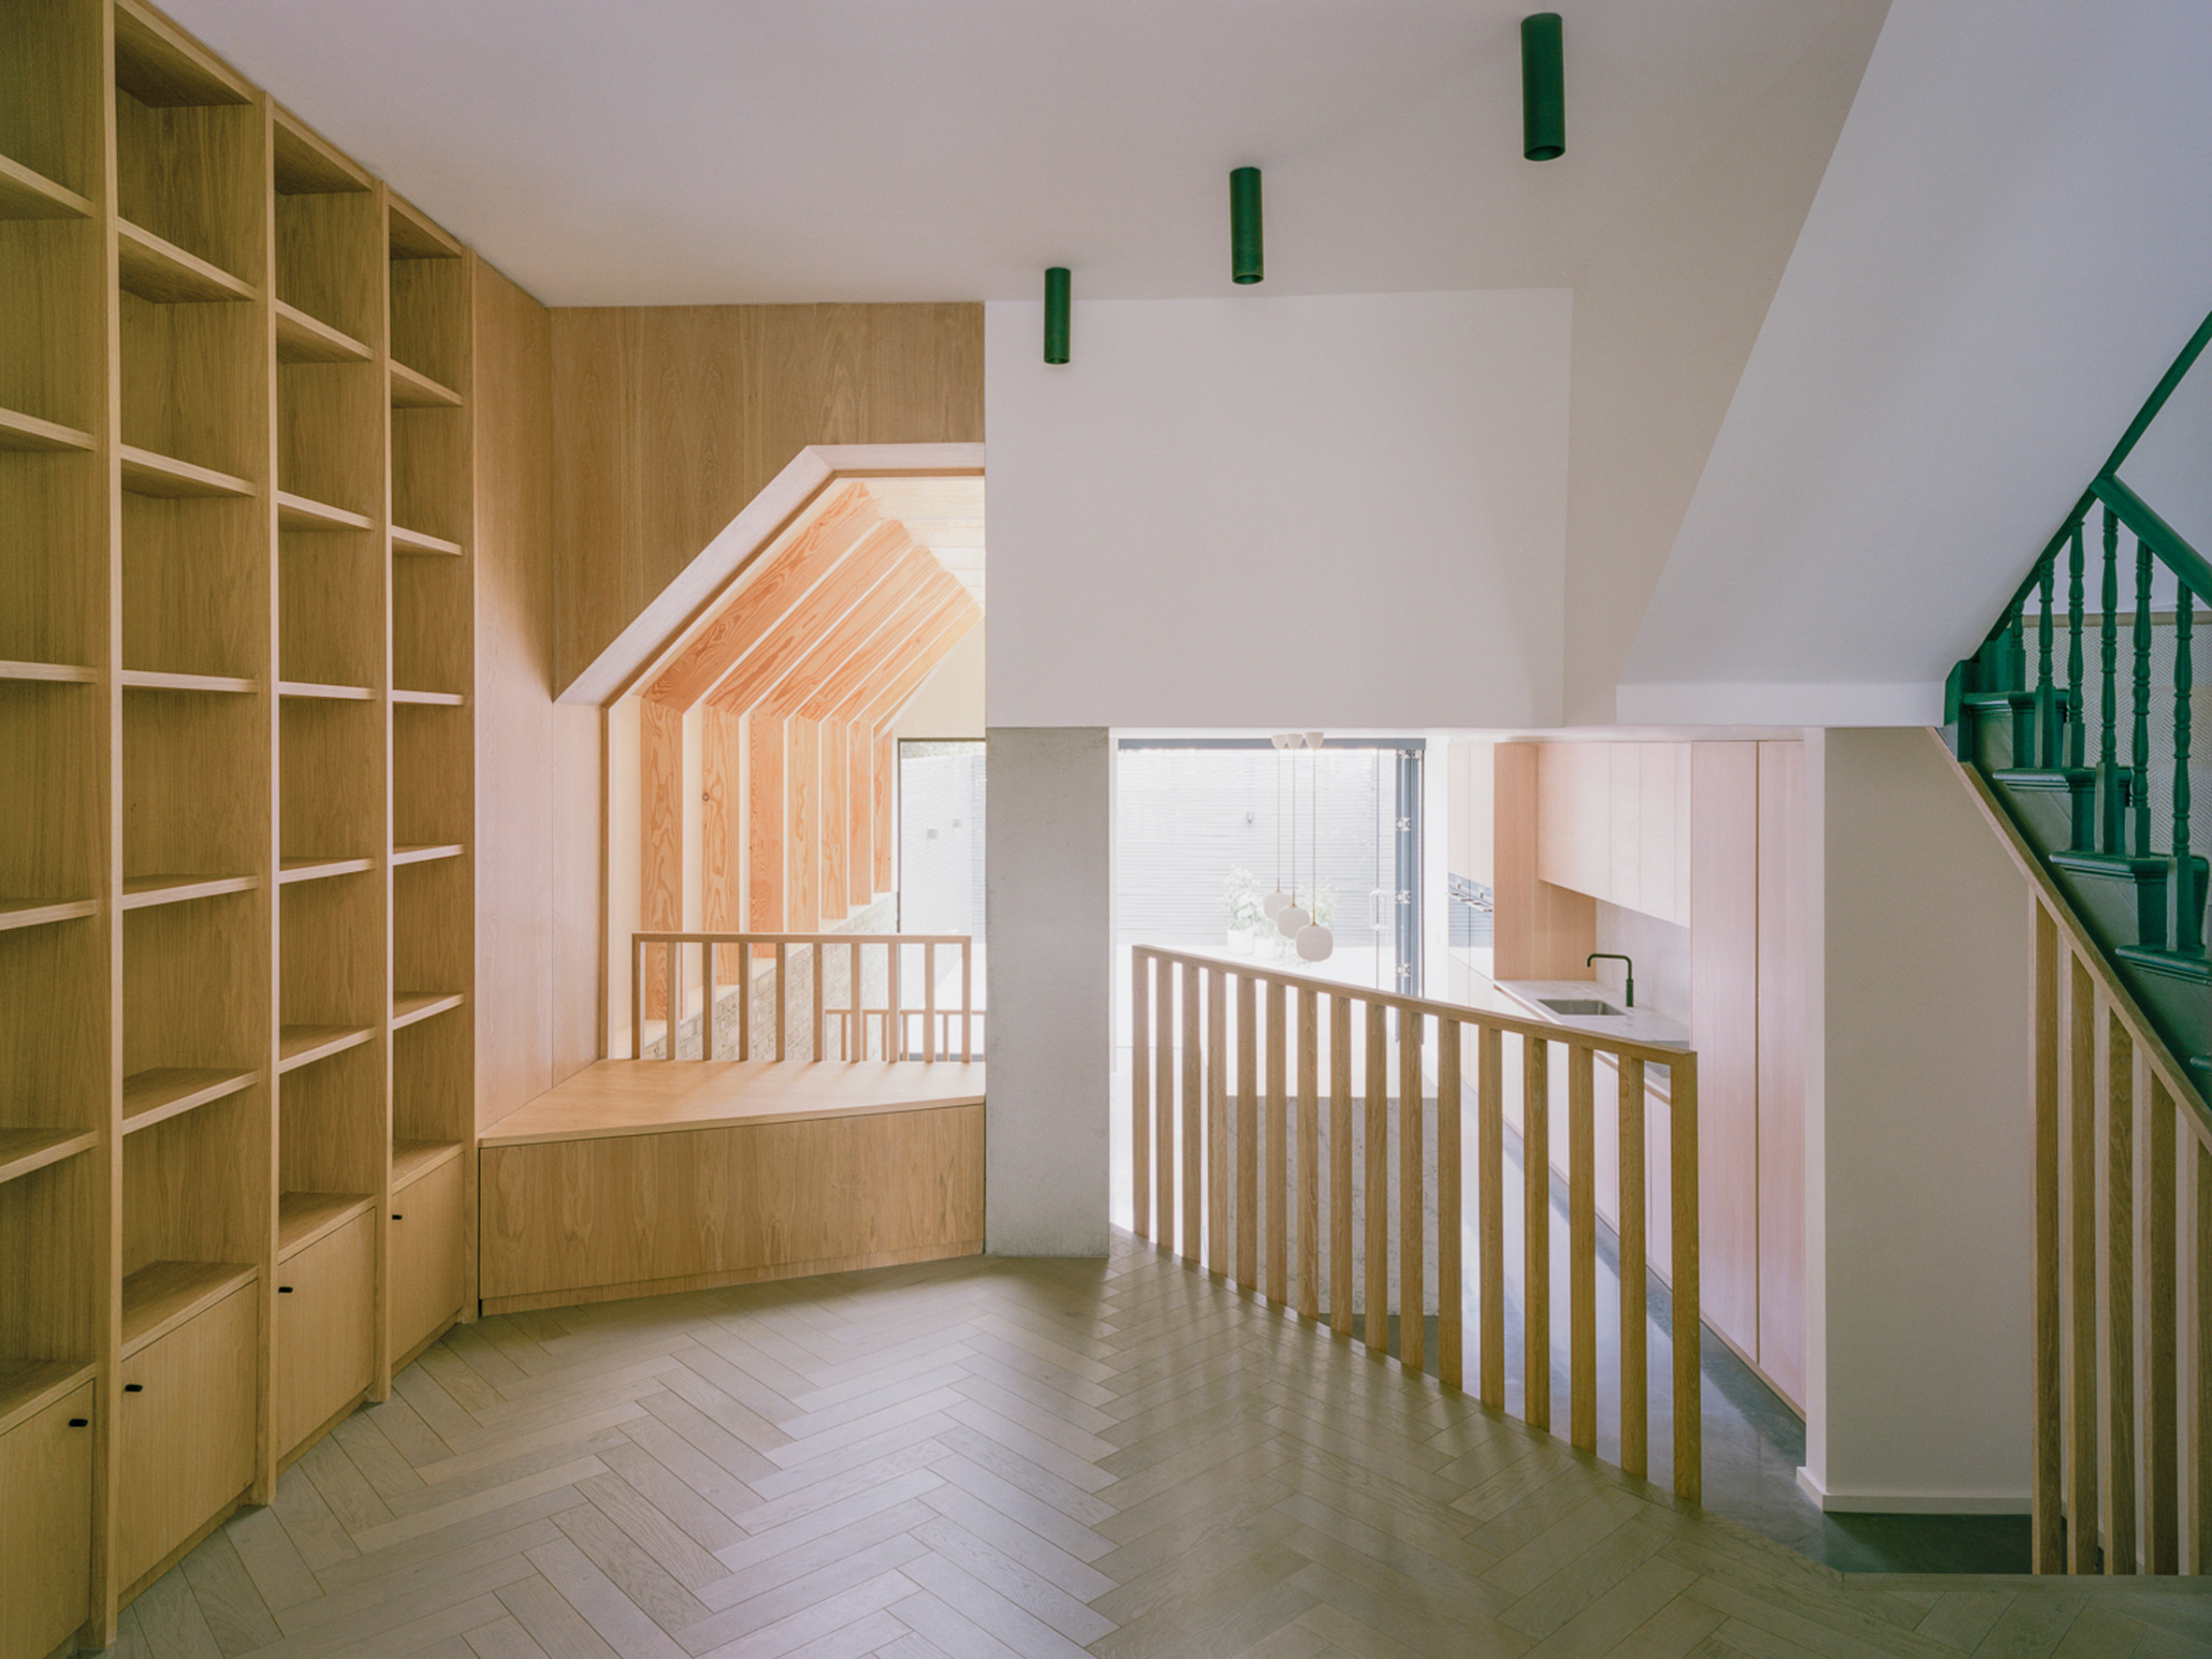 Matthew Giles Architects inserted a reading nook into the ground floor